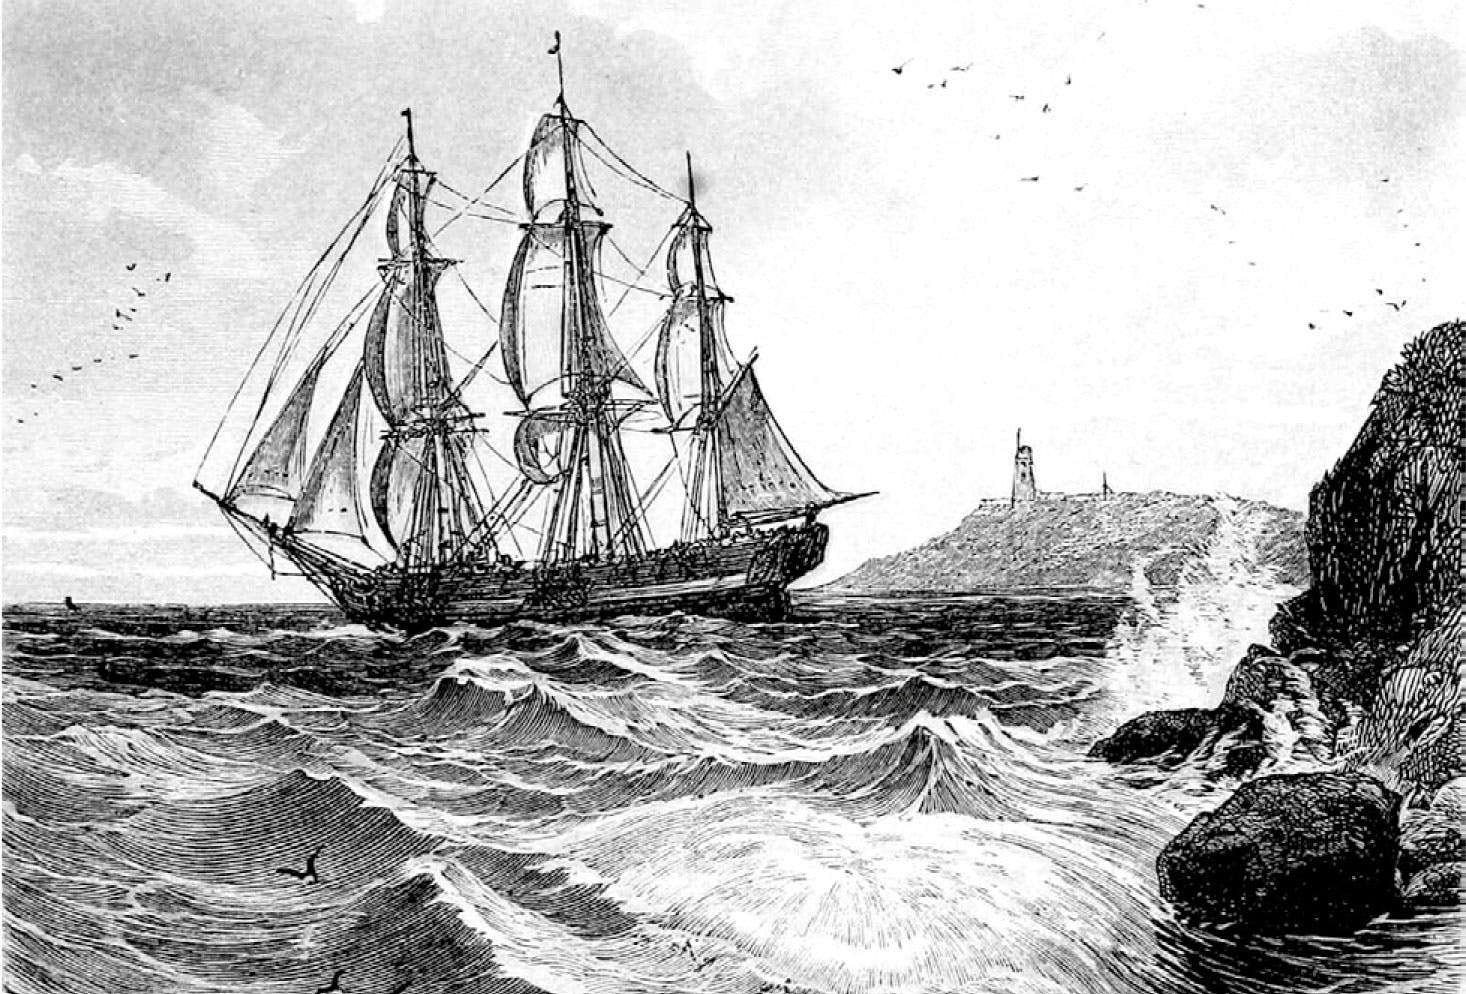 A drawing of a ship in the sea with some rocks on the foreground